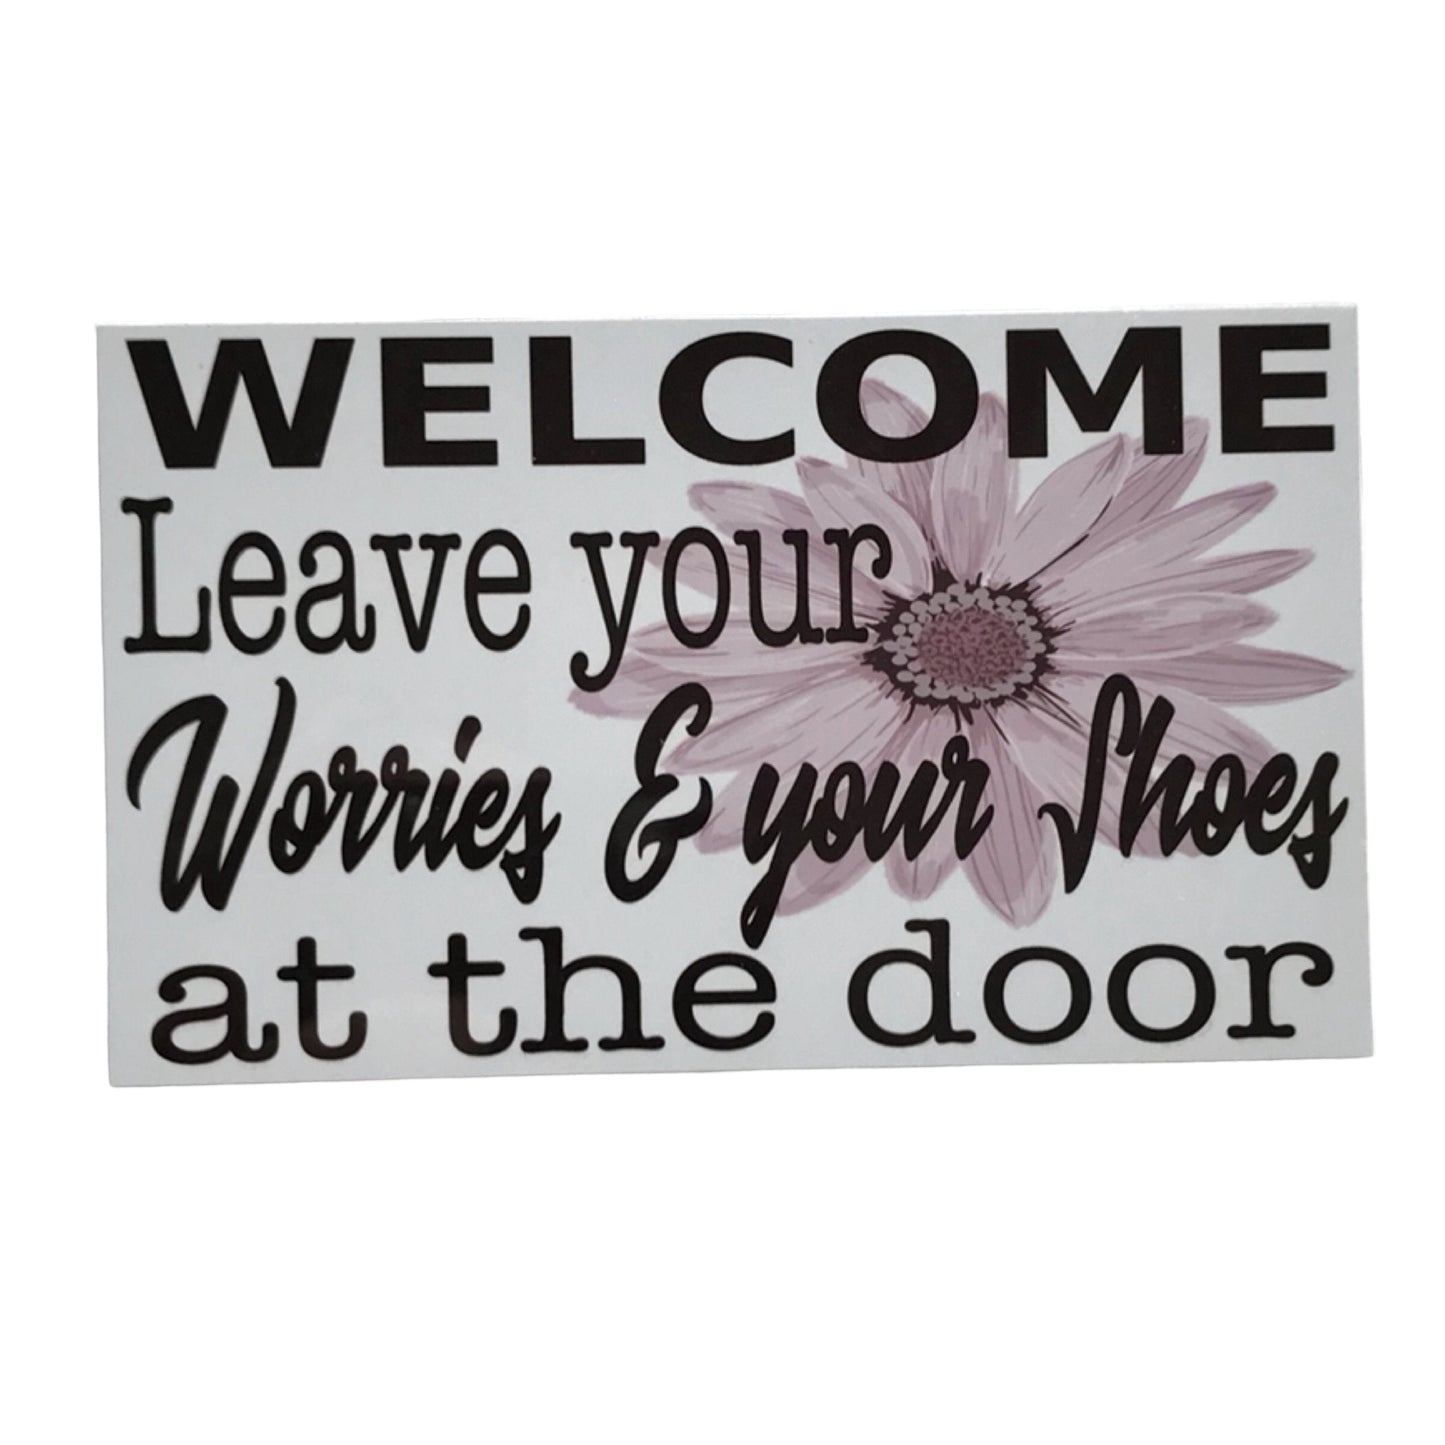 Welcome Leave Your Worries Shoes At The Door Sign - The Renmy Store Homewares & Gifts 